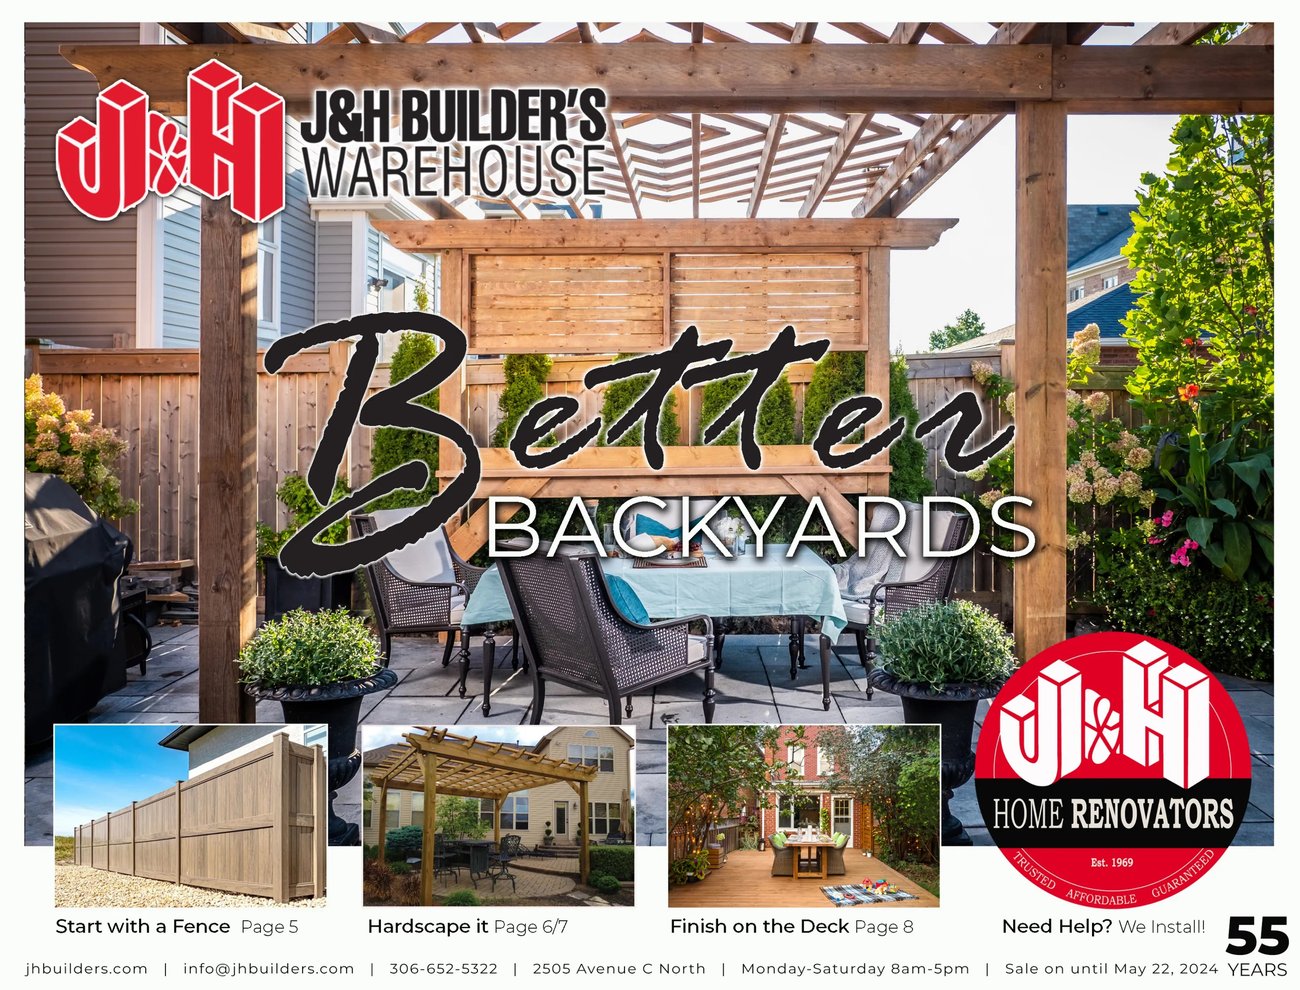 J&H Builder's Warehouse - Flyer Specials - Page 1